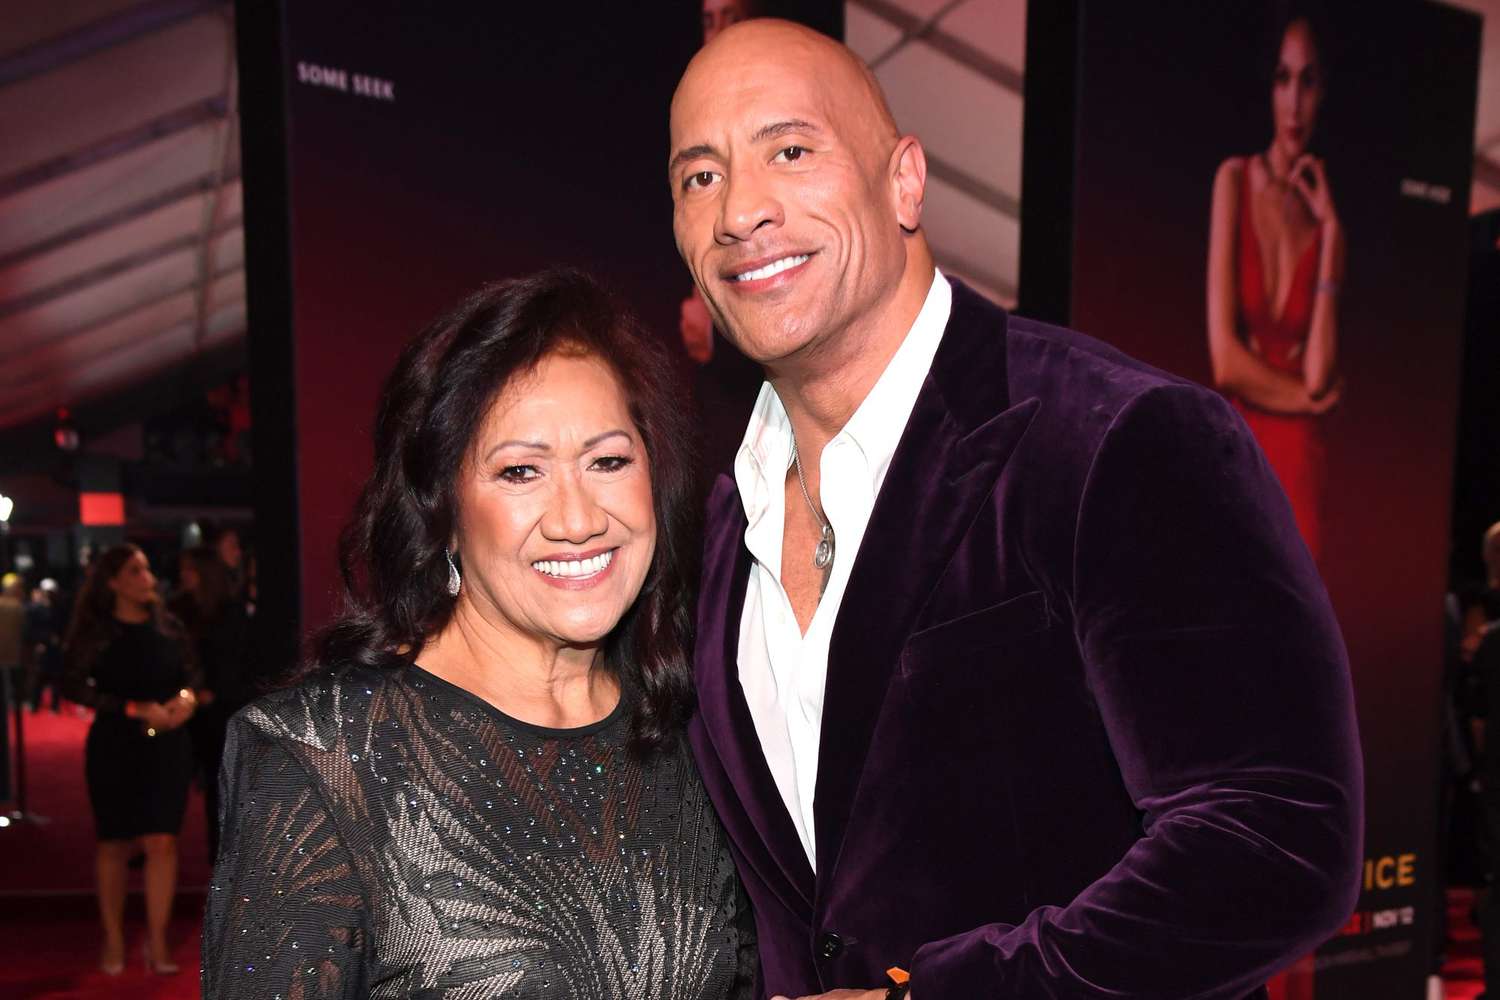 LOS ANGELES, CALIFORNIA - NOVEMBER 03: (L-R) Ata Johnson and Dwayne Johnson attend the World Premiere of Netflix's "Red Notice" at Regal LA Live on November 03, 2021 in Los Angeles, California. (Photo by Kevin Mazur/Getty Images for Netflix)